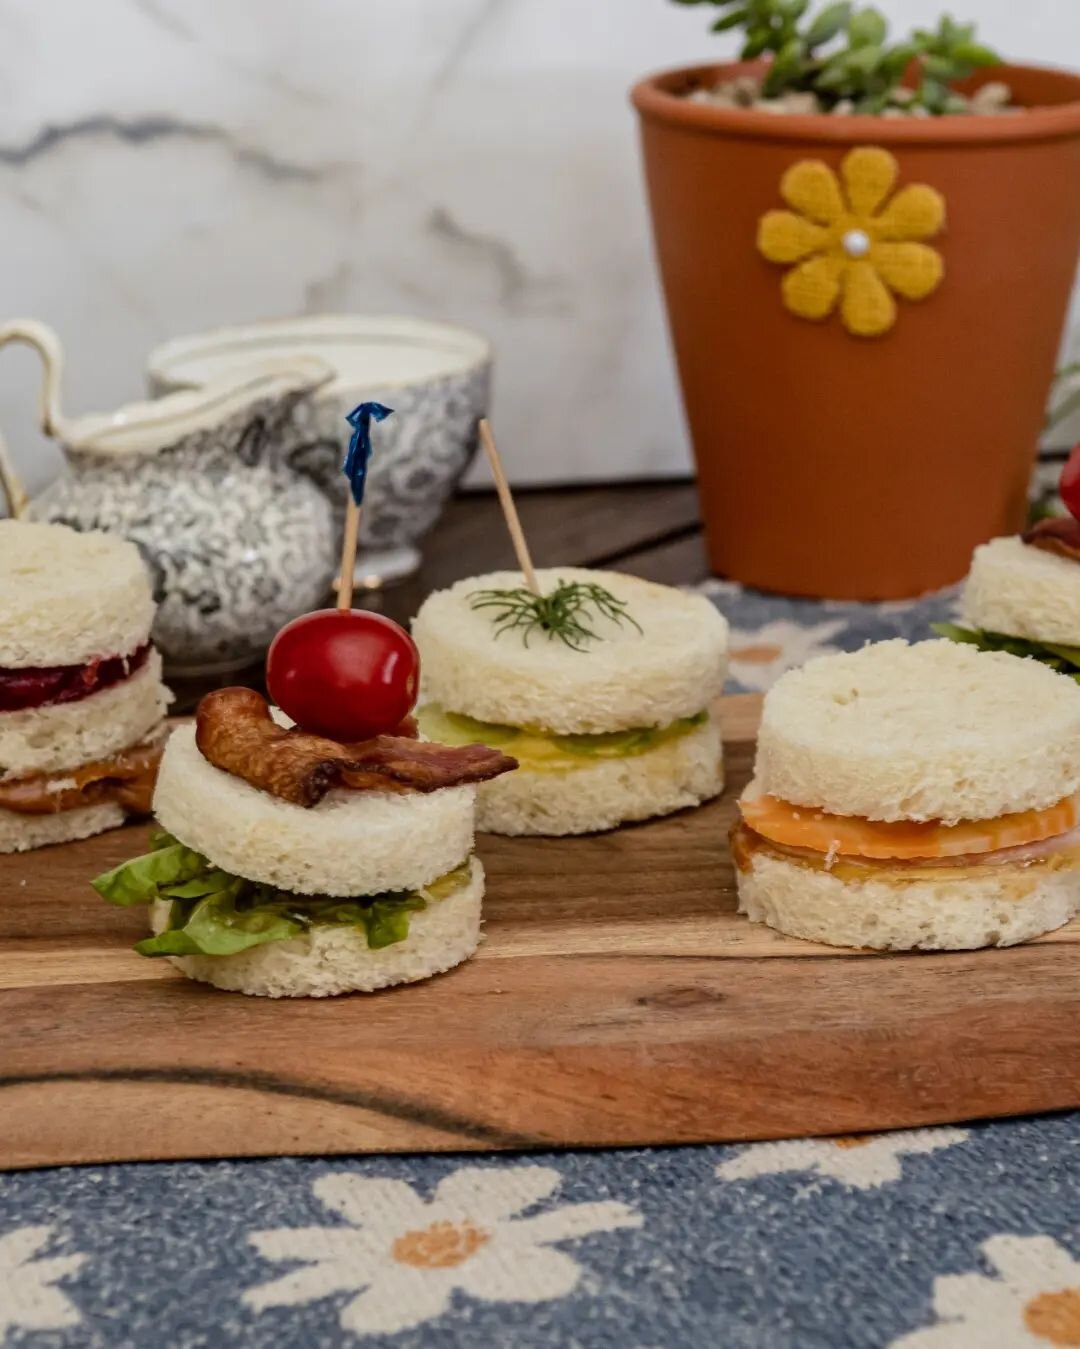 Treat the special lady in your life with a unique high tea in our greenhouse! 
Enjoy an assortment of pastries, mini sandwiches and a drink of your choice! 
Book your reservation online and see pur other Mothers day options at www.deherdtgardens.com 